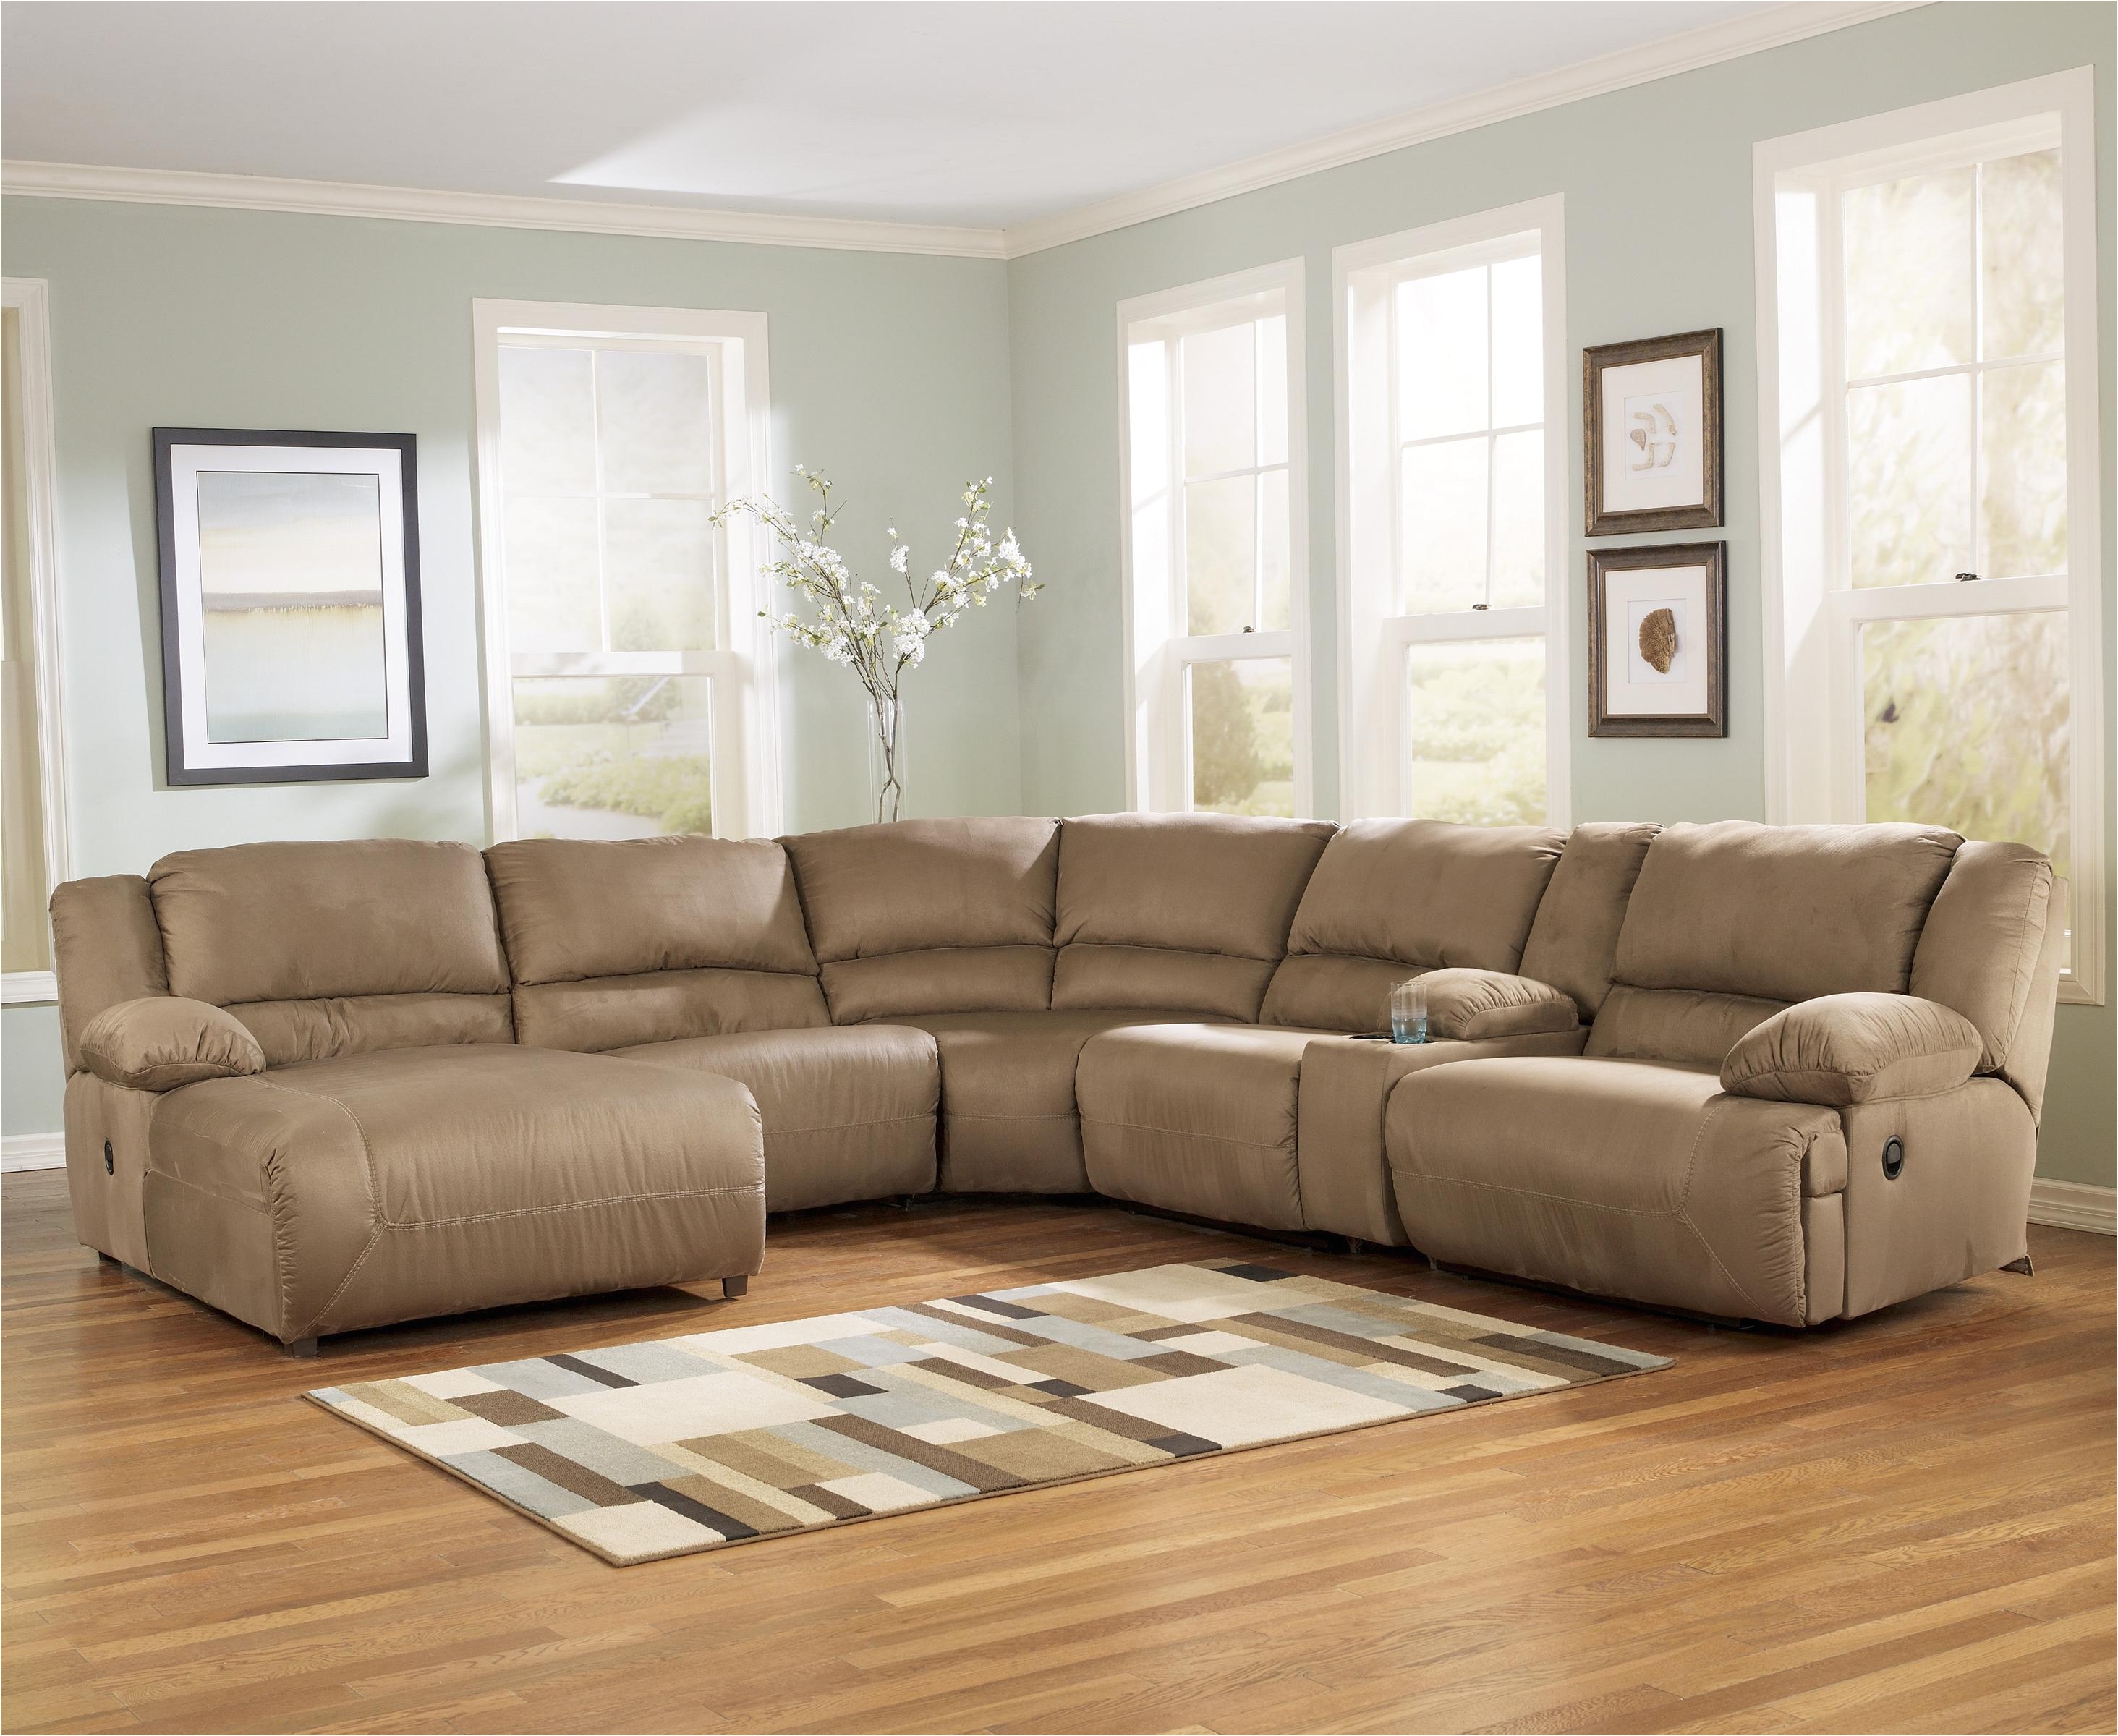 6 piece sectional sofa group